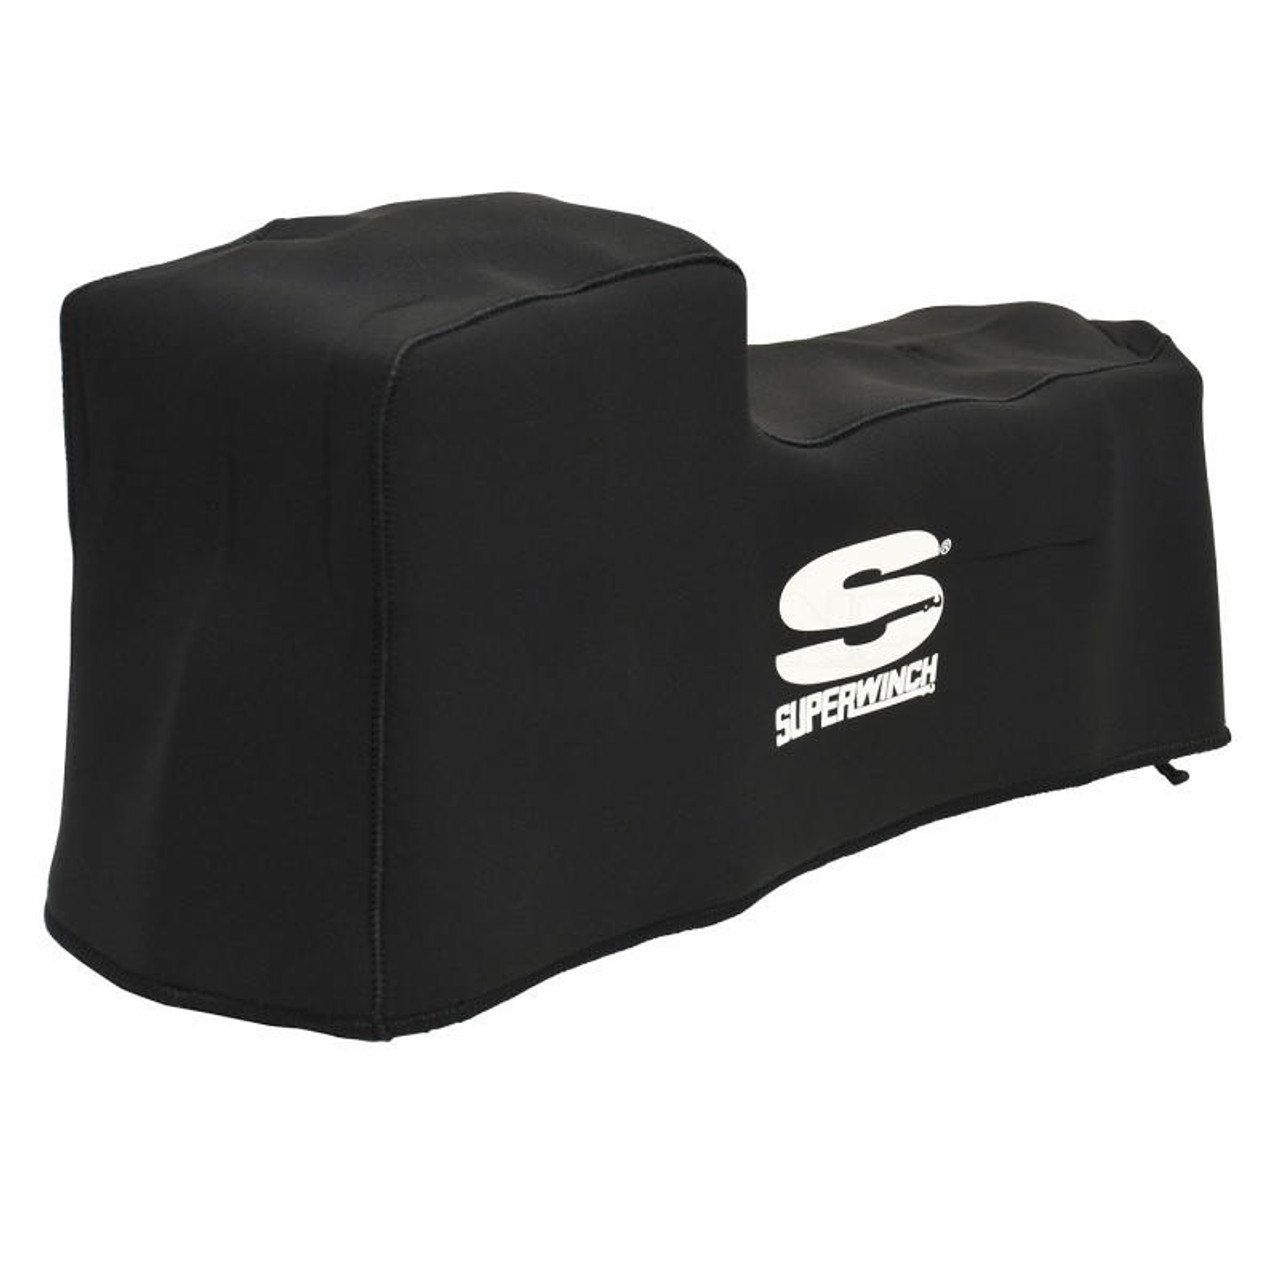 Superwinch Winch Cover for 9500/11500 and S5500/75/ Tiger Shark Winches - Blk Neoprene - 1570